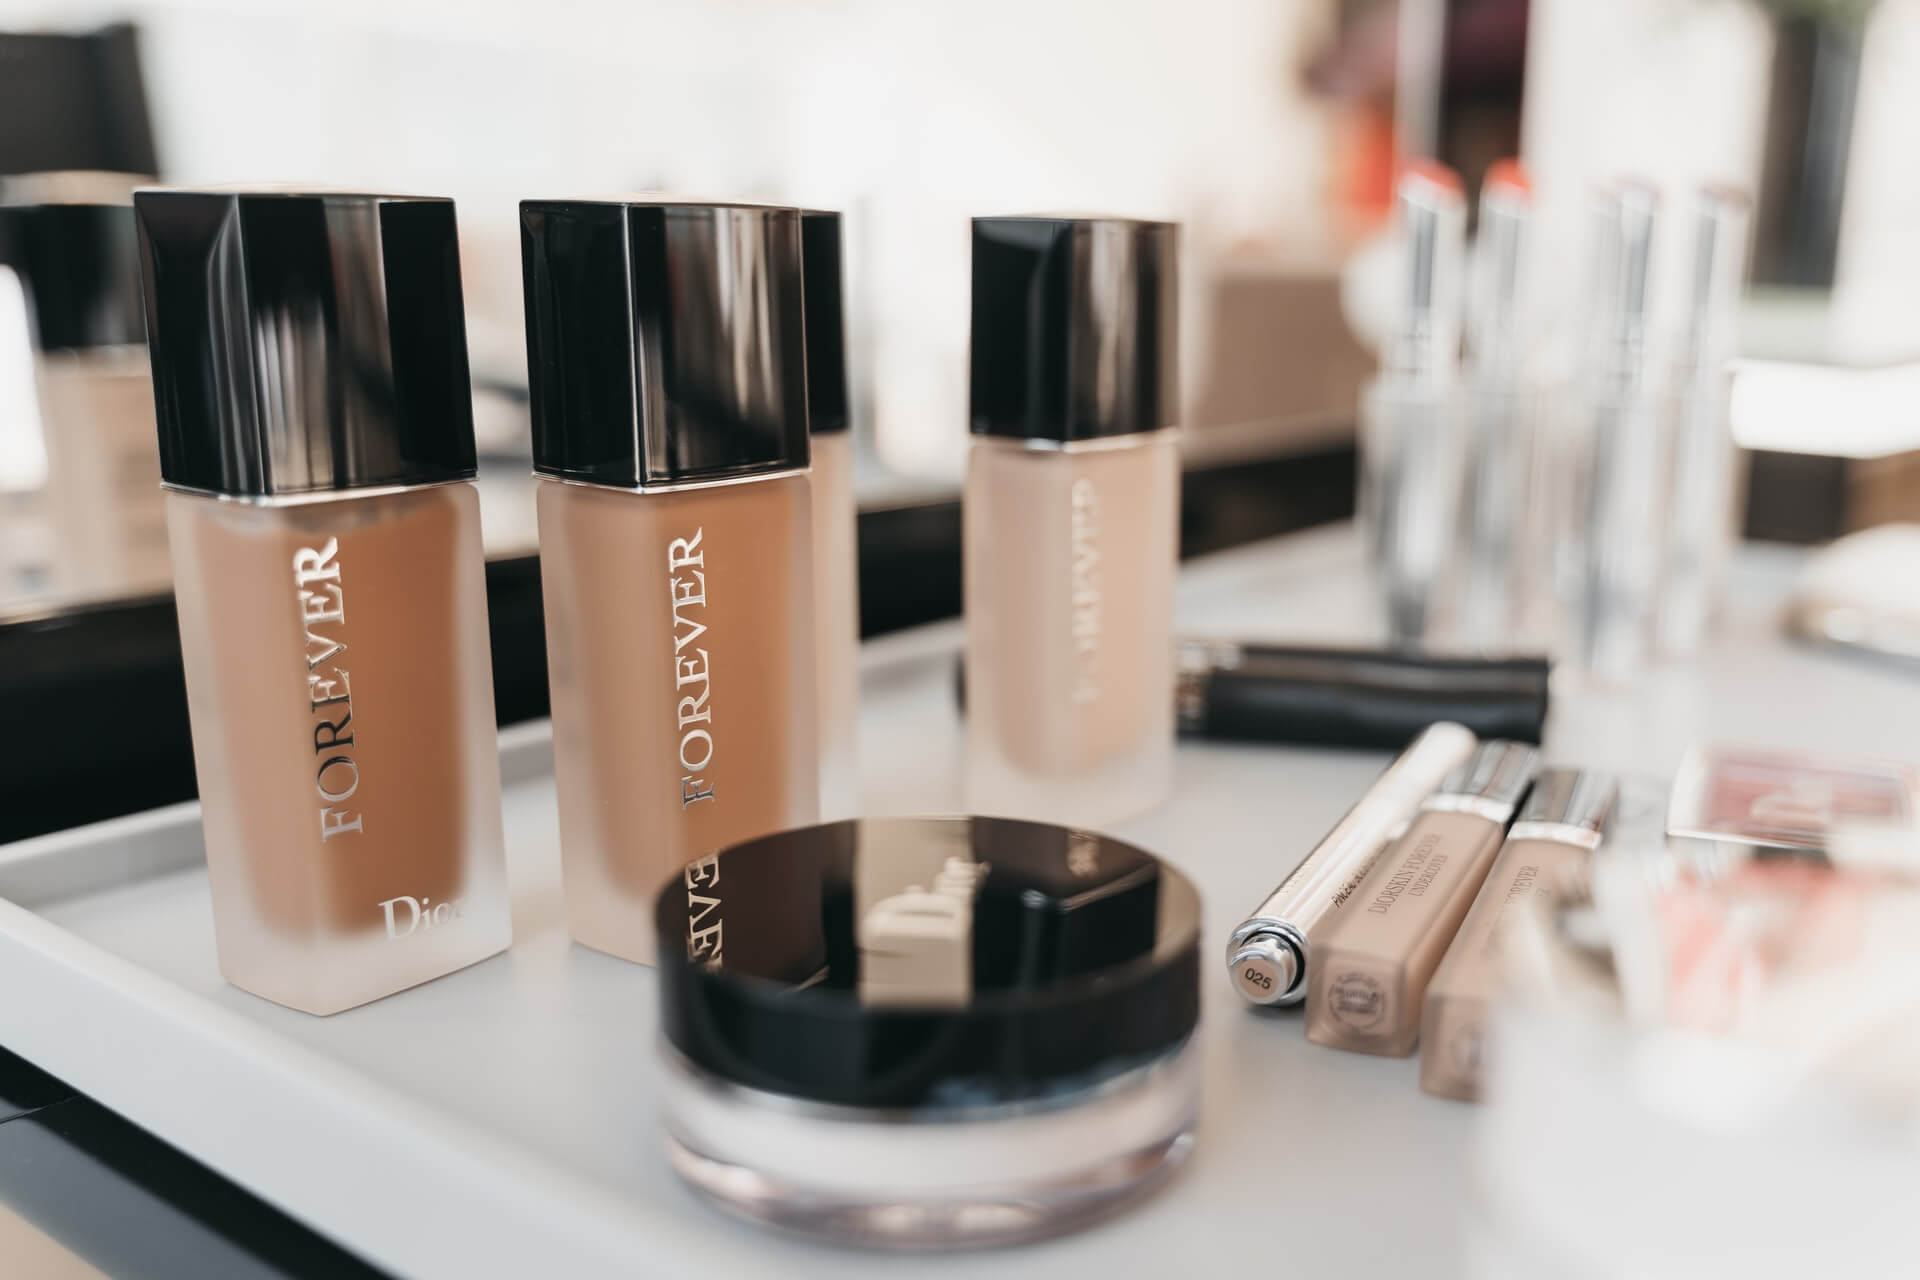 The foundation of choice for make-up artists! Find out which foundation is number one!